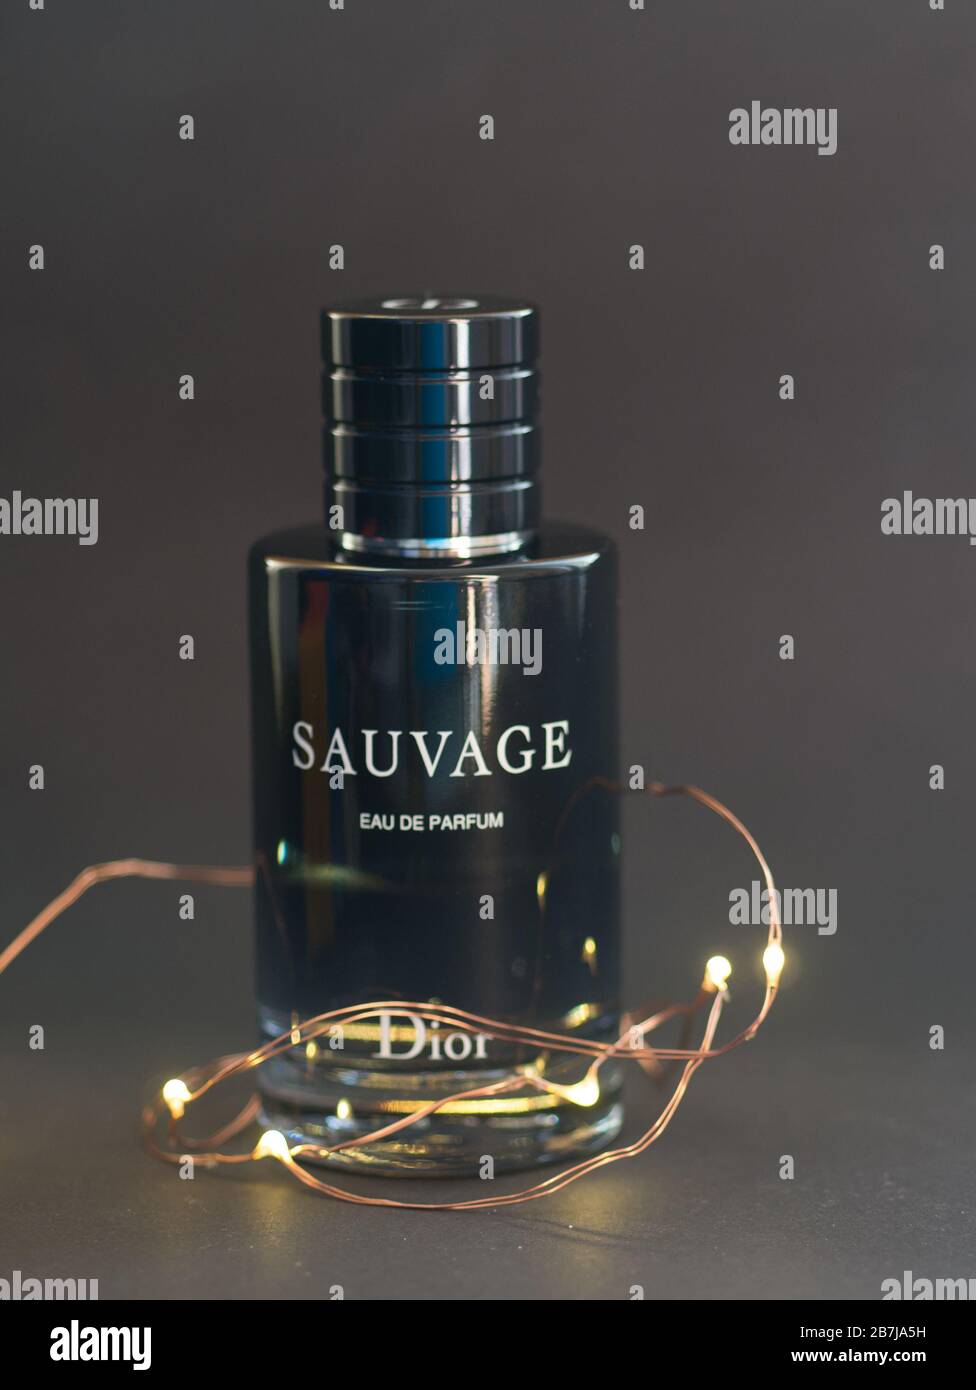 SAUVAGE Parfum by Dior. Aftershave Perfume Fragrance for Men by French  Fashion House Christian Dior. Usa, March 2020 Stock Photo - Alamy